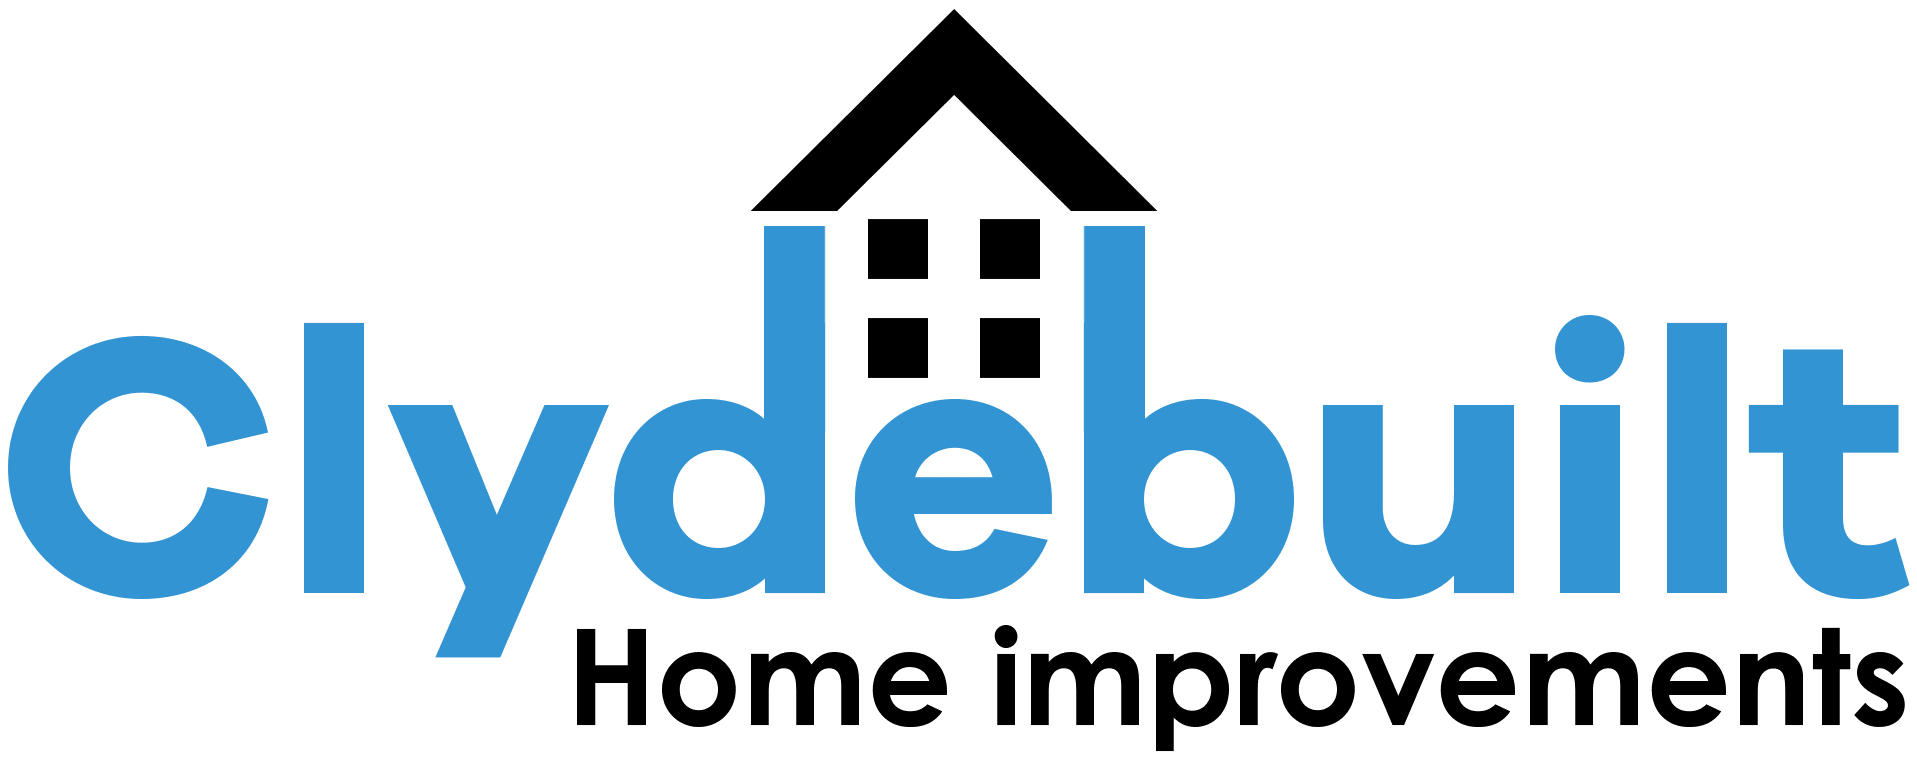 Clydebuilt home improvements